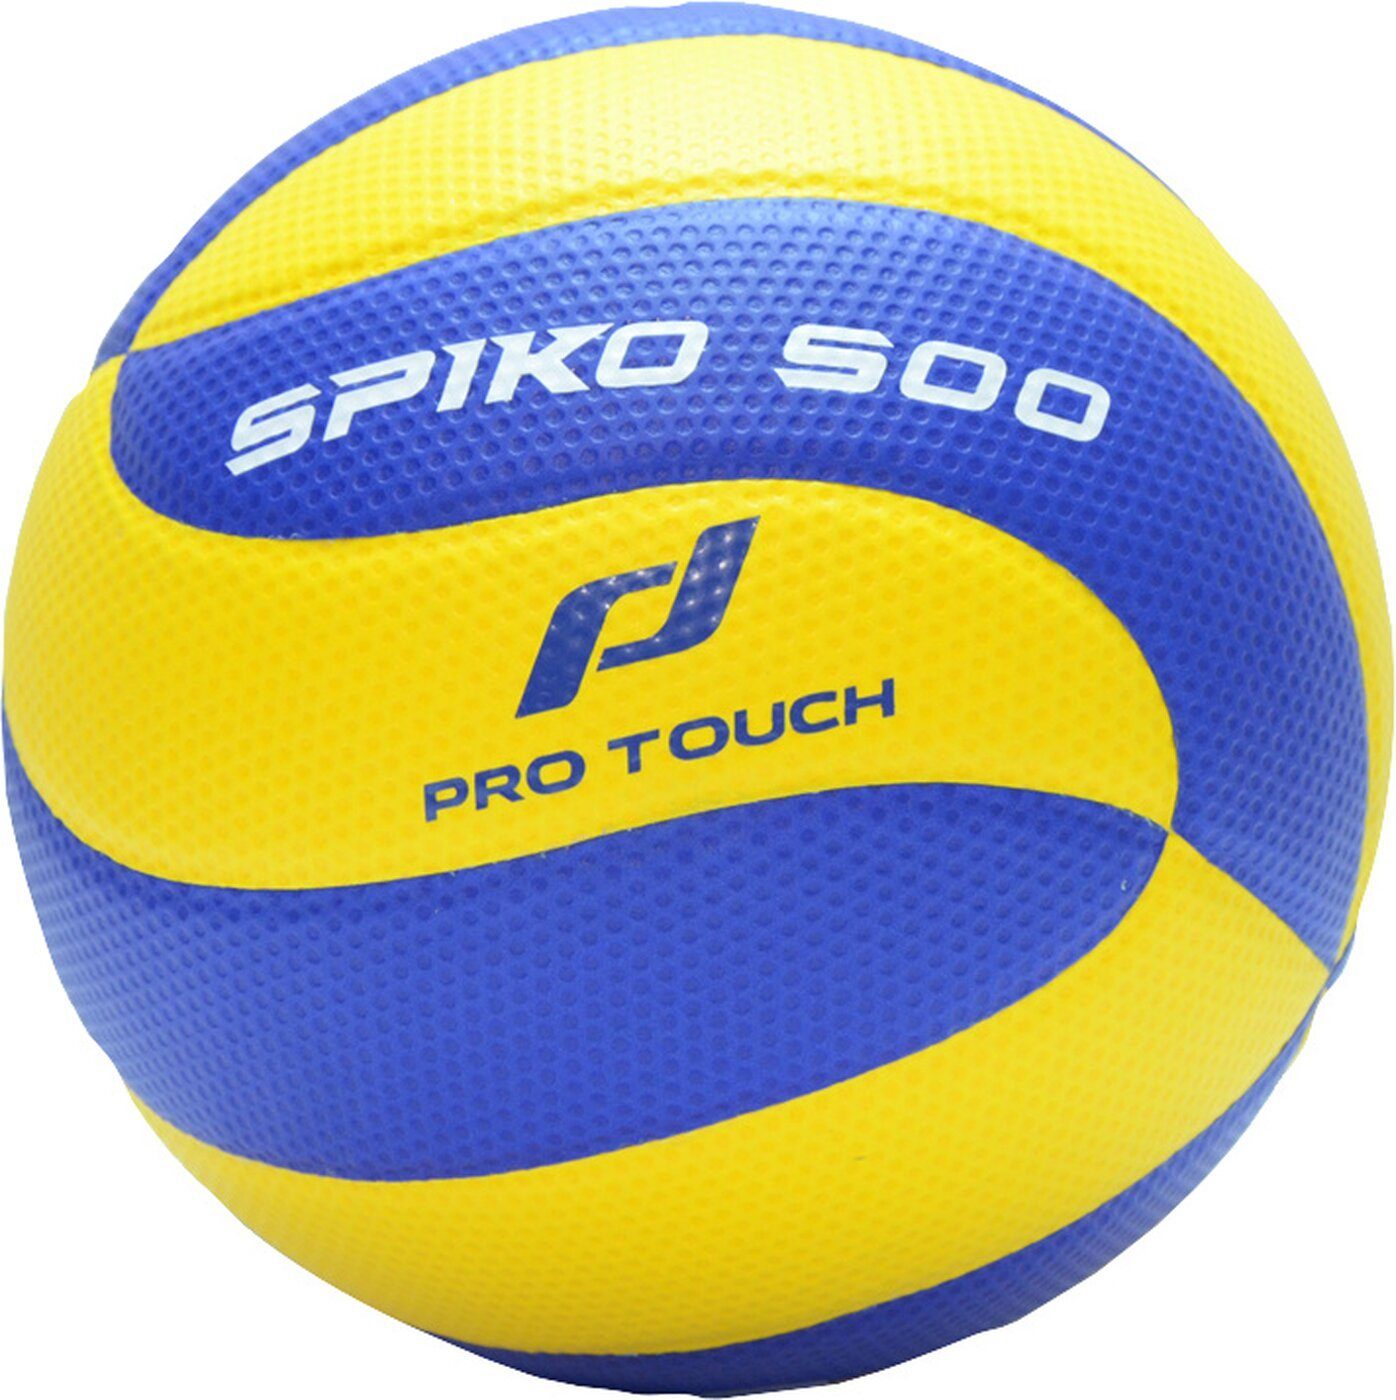 Pro Touch Volleyball Volleyball SPIKO 500